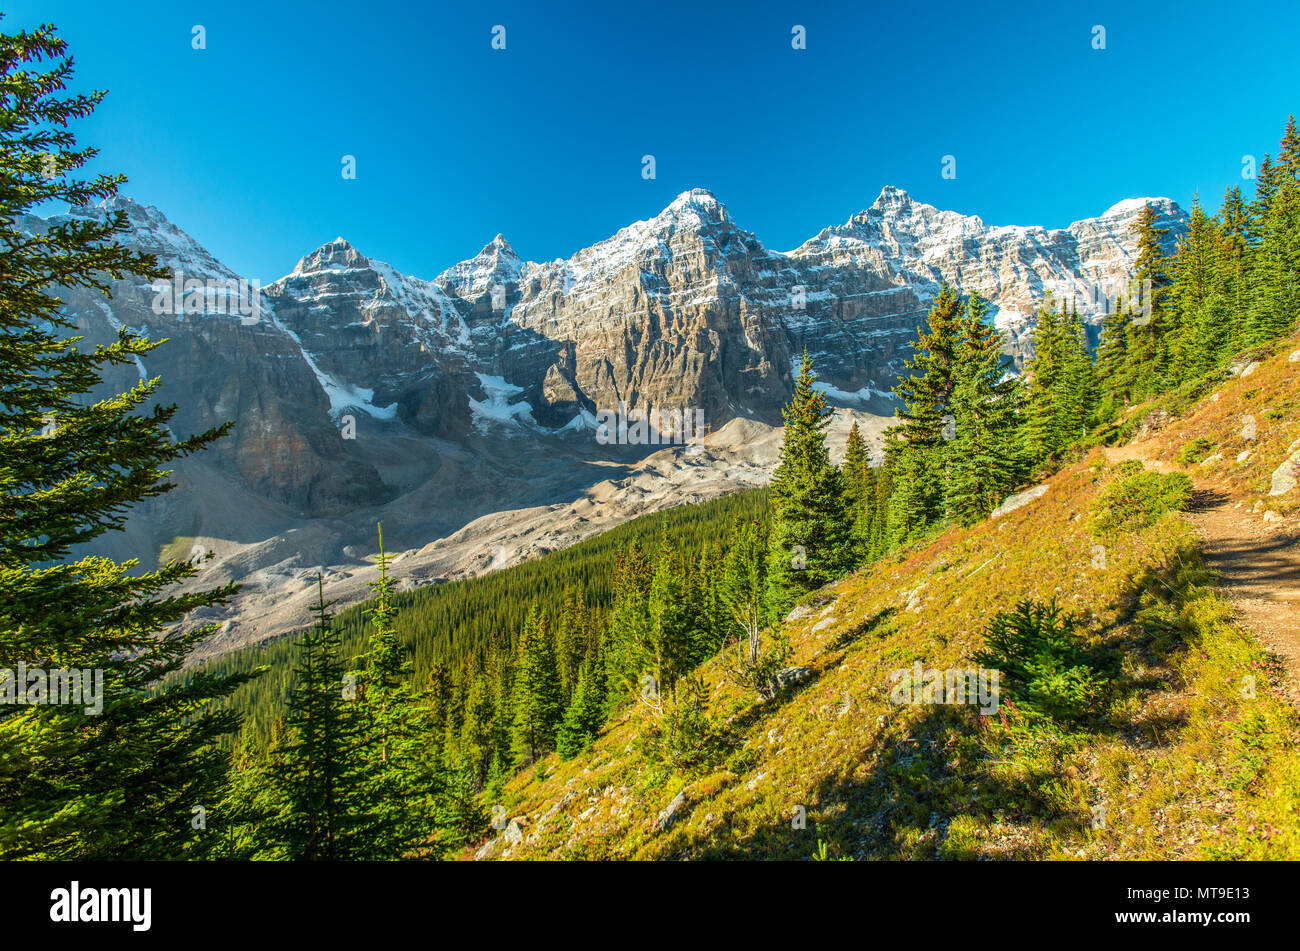 Beautiful view from of the valley of ten peaks from the trail. Moraine lake area of Rocky Mountains. Canadian iconic Banff national park. Mountains. Stock Photo